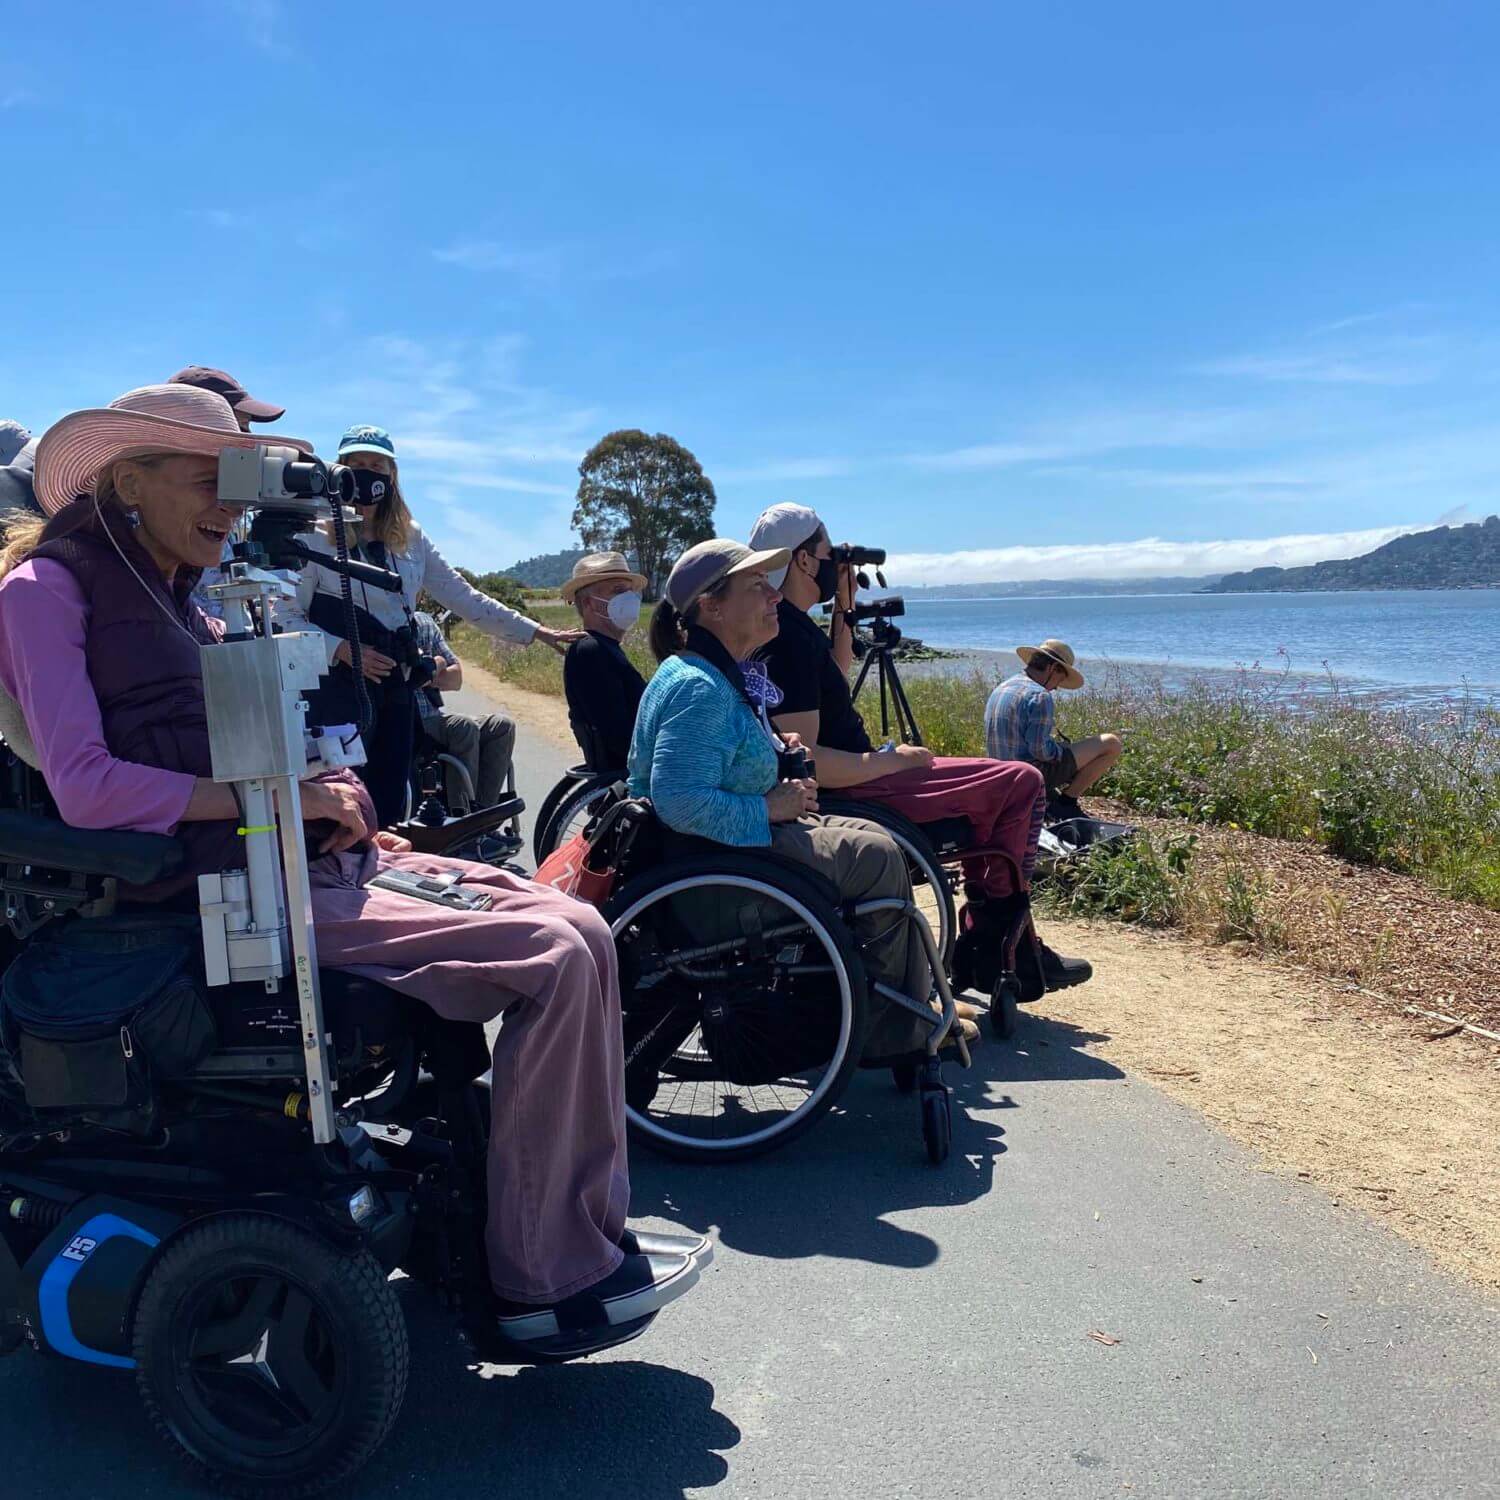 Group of people in wheelchairs use binoculars to look at birds